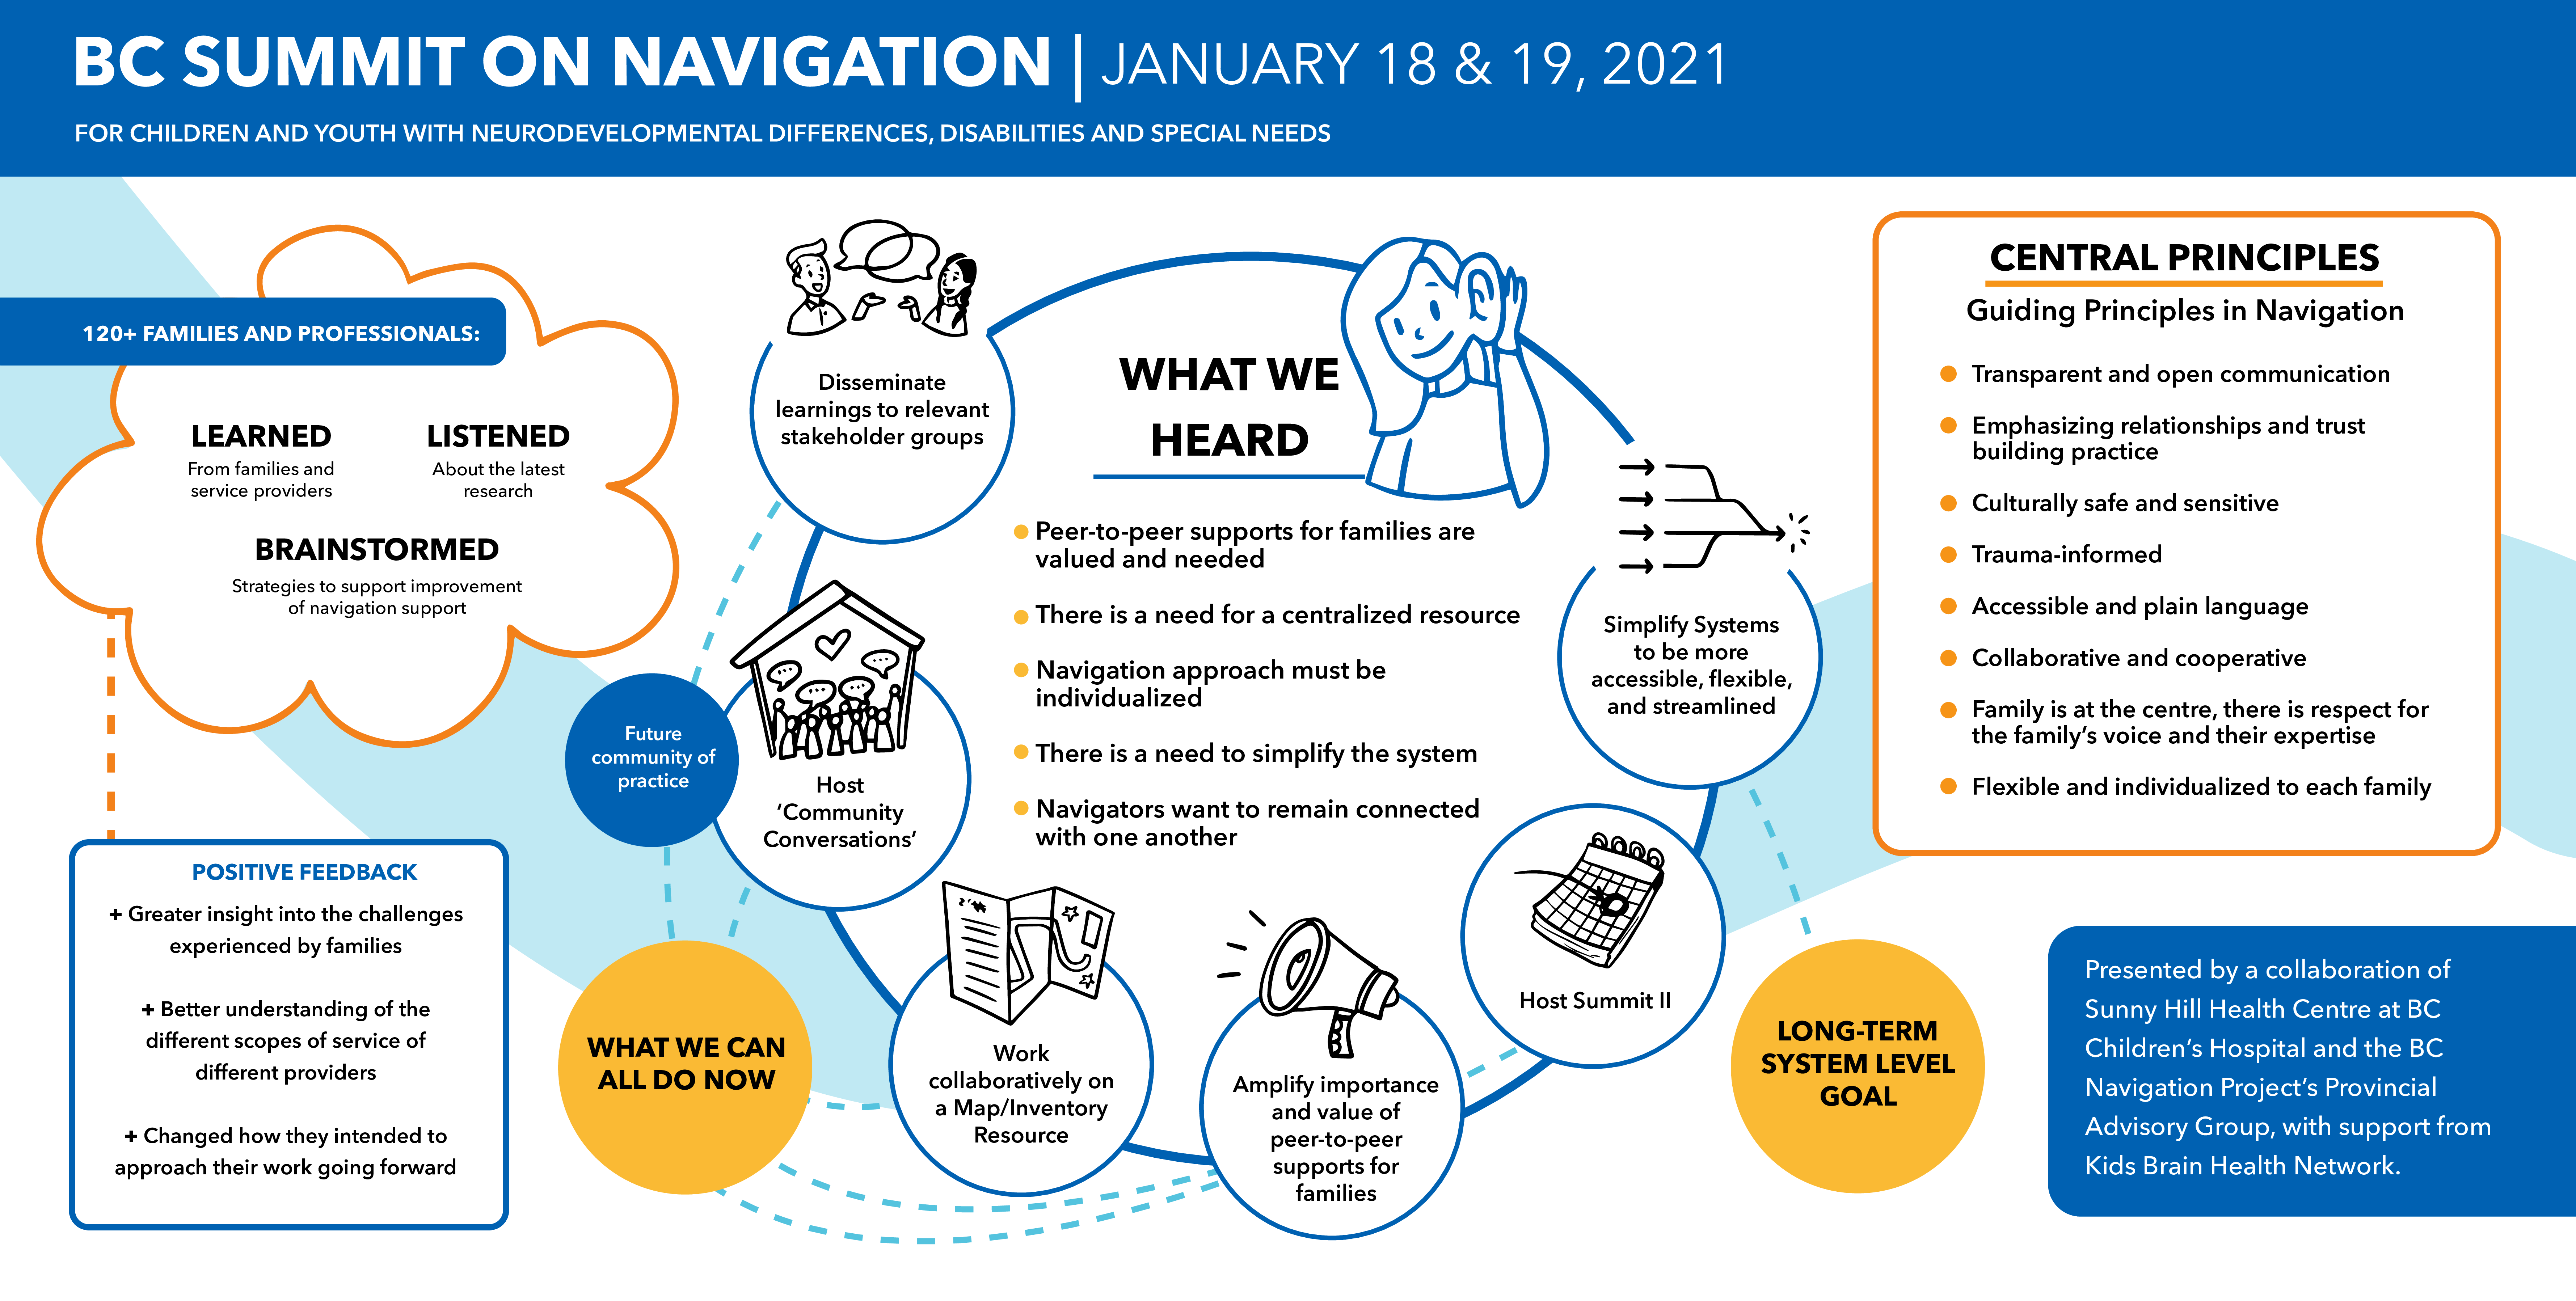 Infographic - BC Summit on Navigation for Children and Youth with Neurodevelopmental Differences, Disabilities, and Special Needs